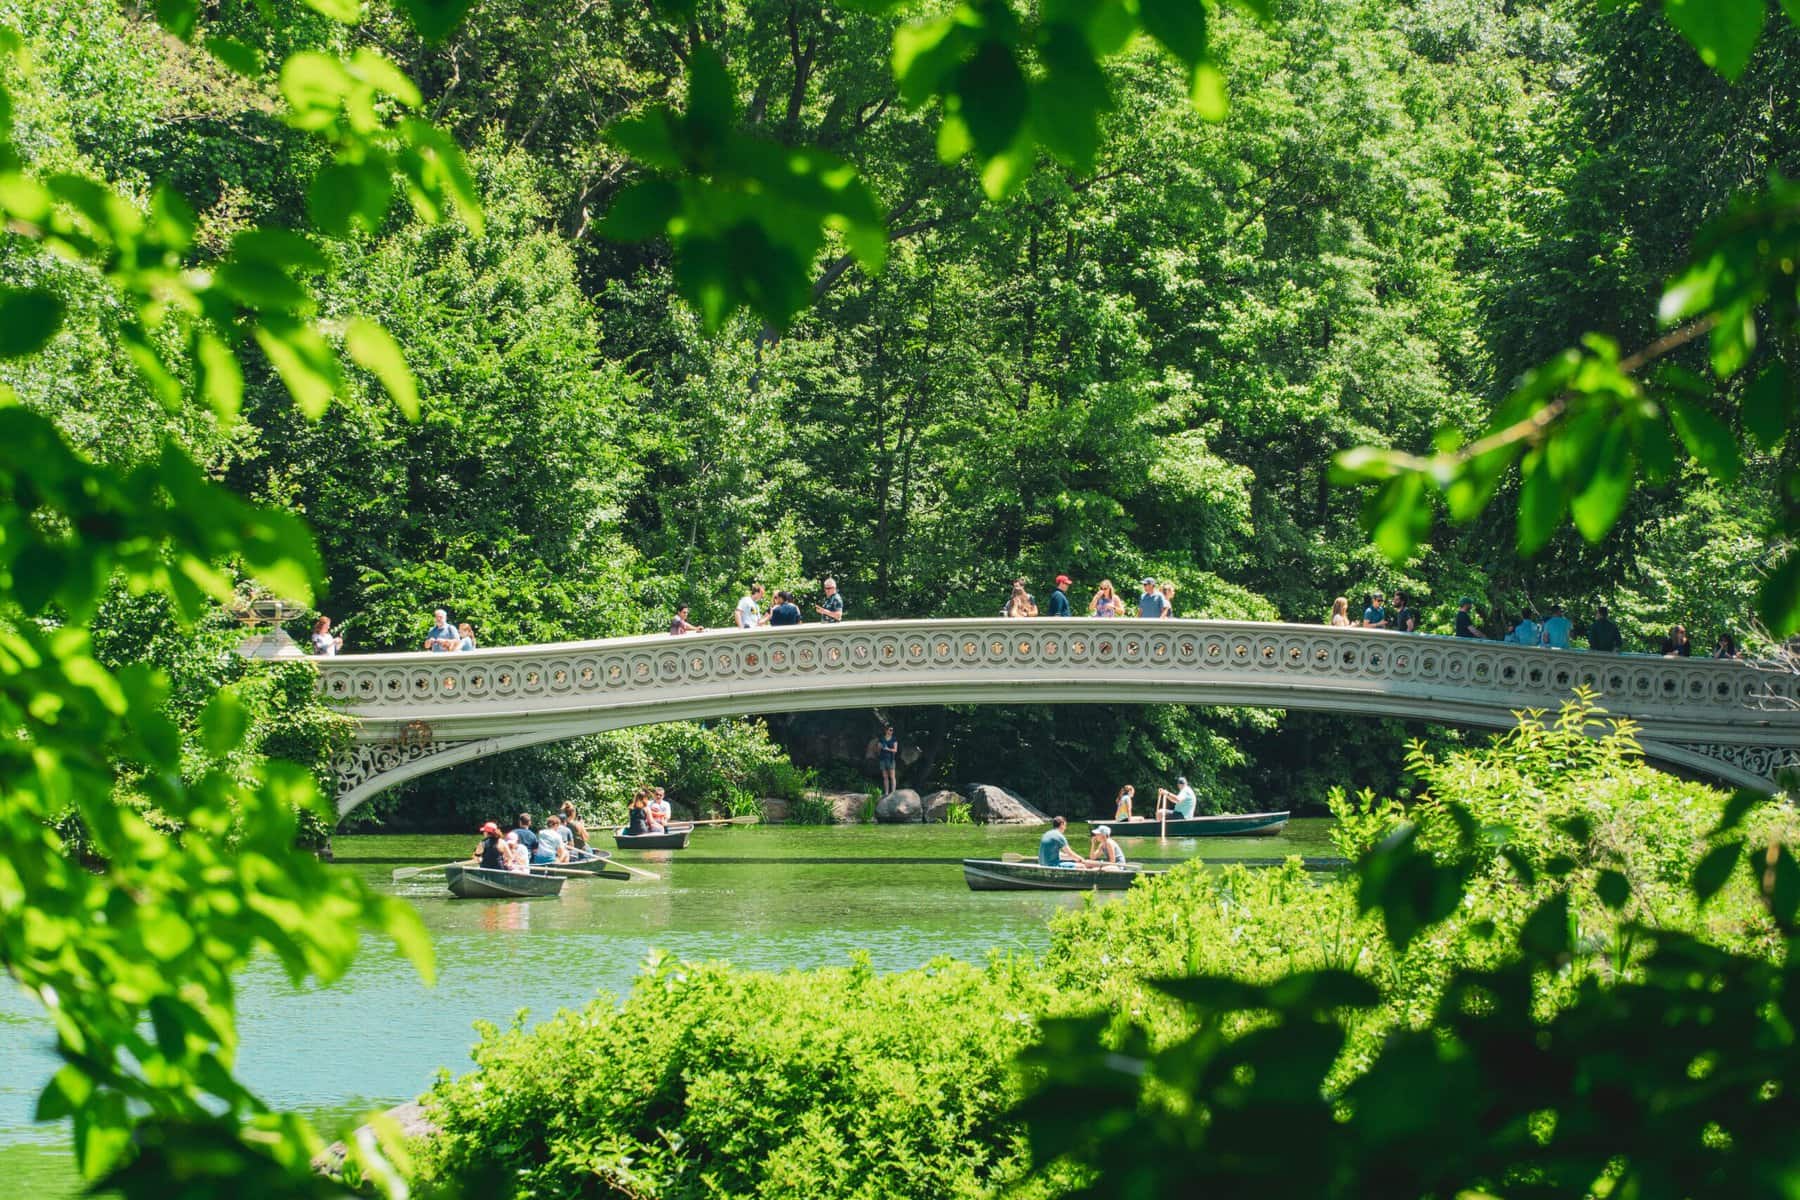 A bridge over a pond in central park with people in canoes.